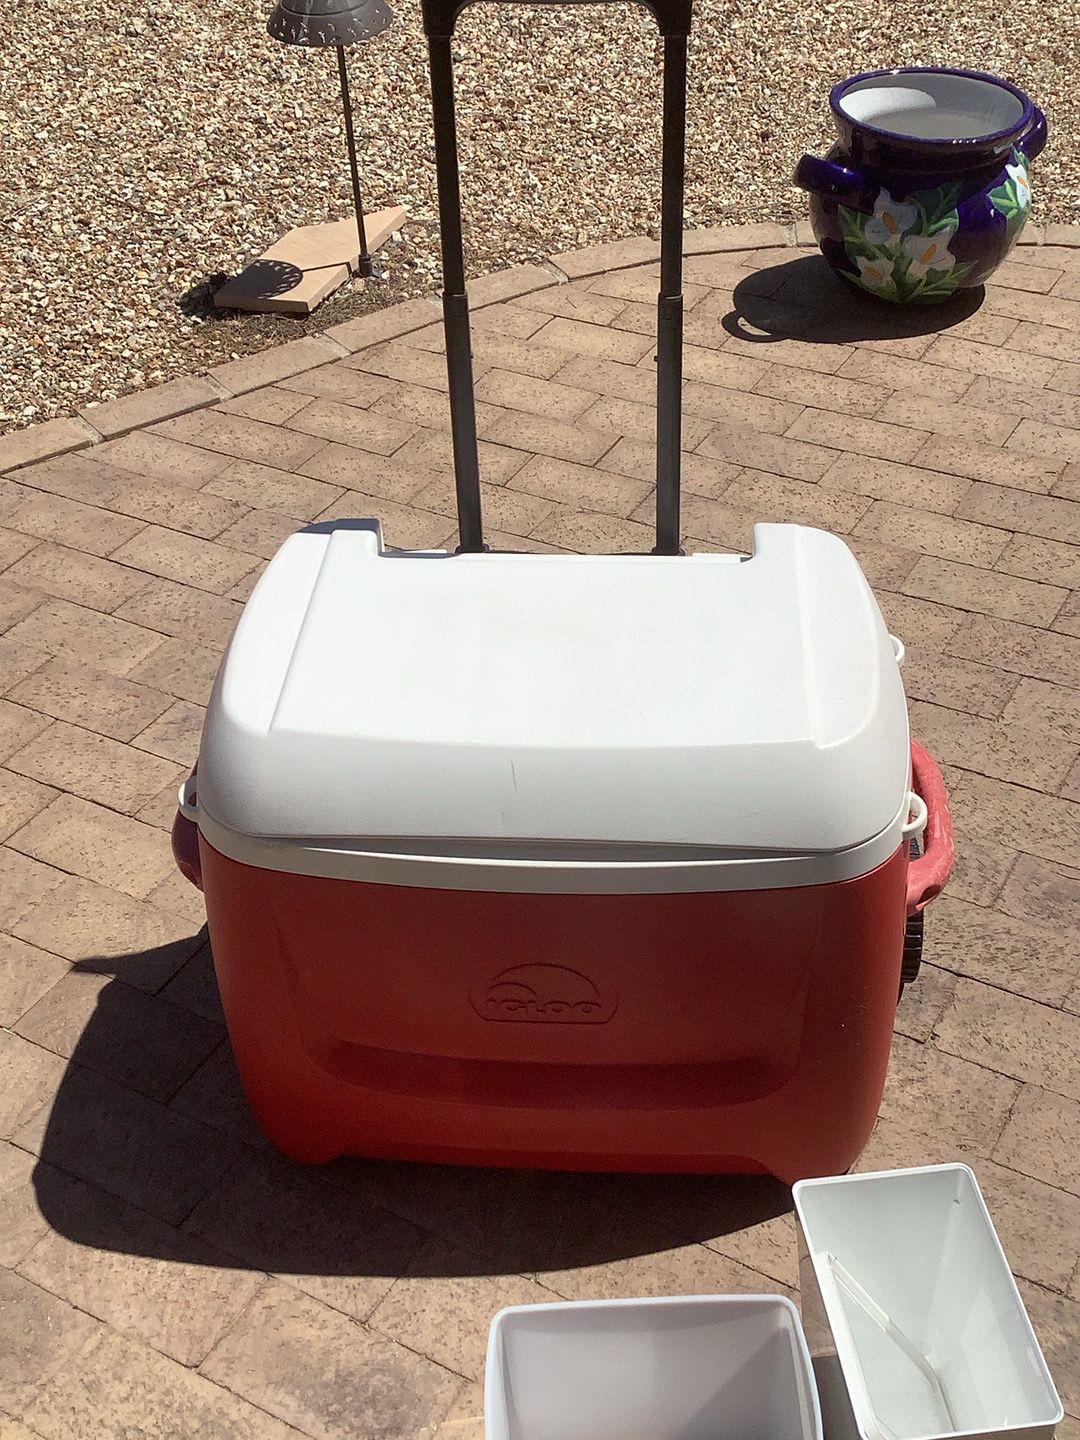 Igloo Cooler With Containers